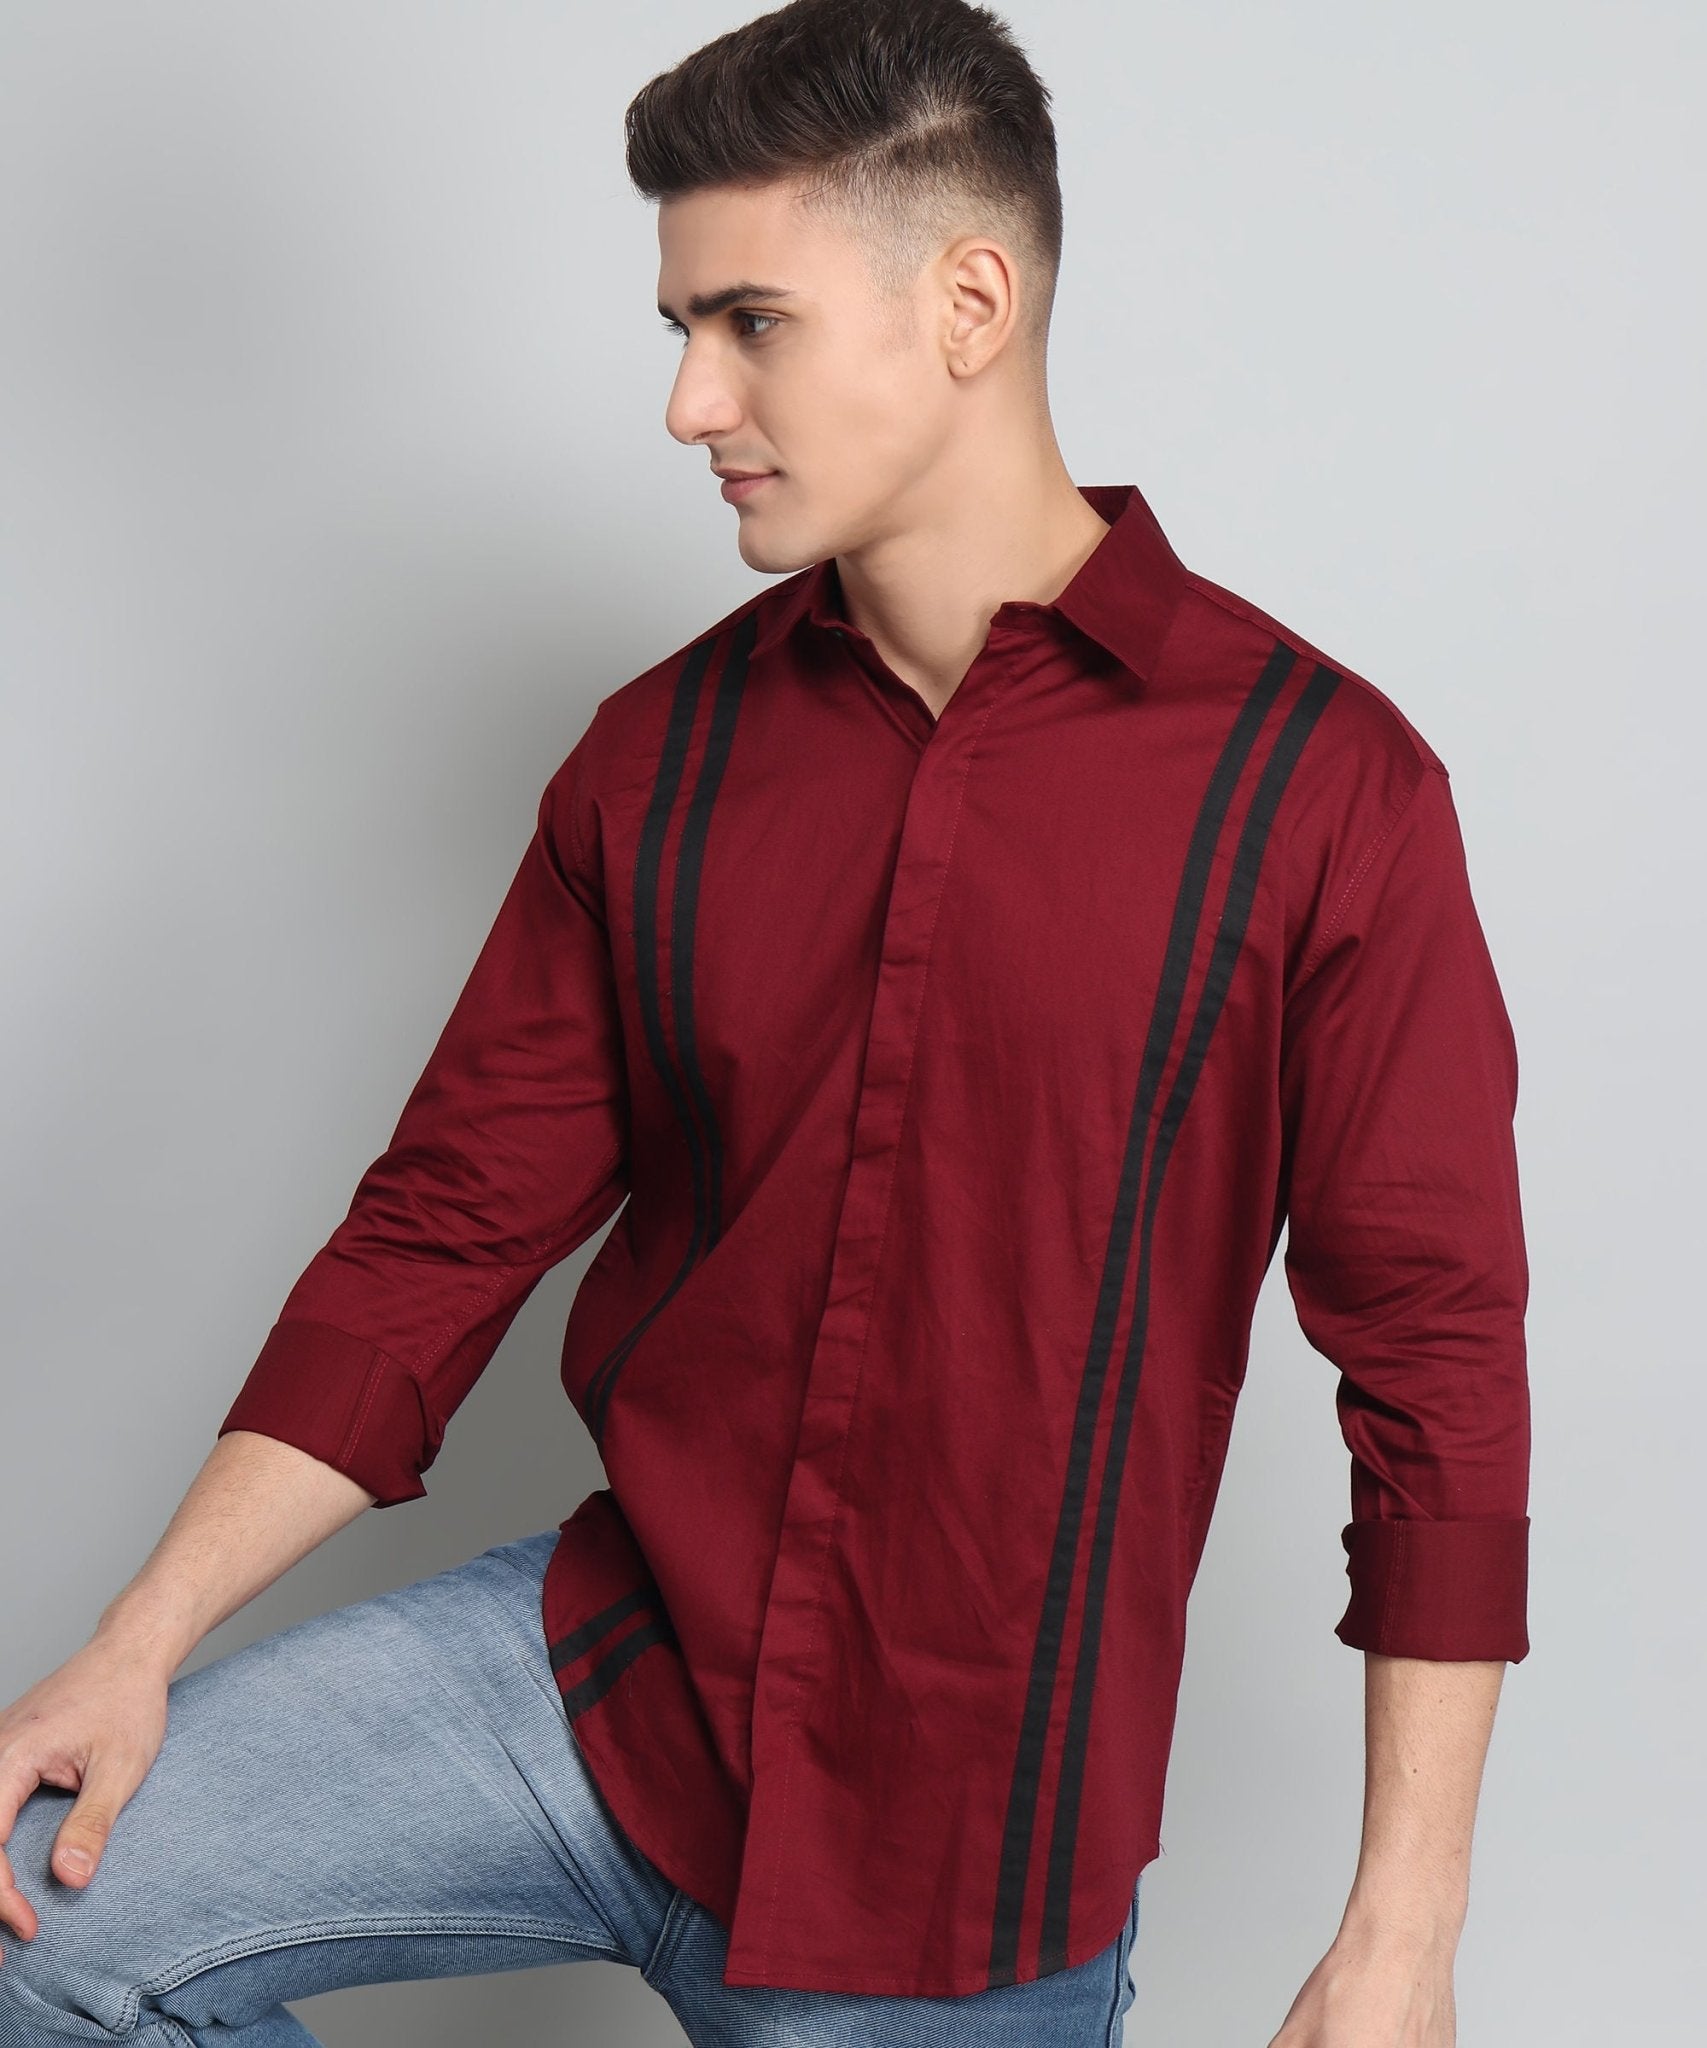 TryBuy Premium Maroon Colored Black Striped Cotton Casual Shirt for Men - TryBuy® USA🇺🇸